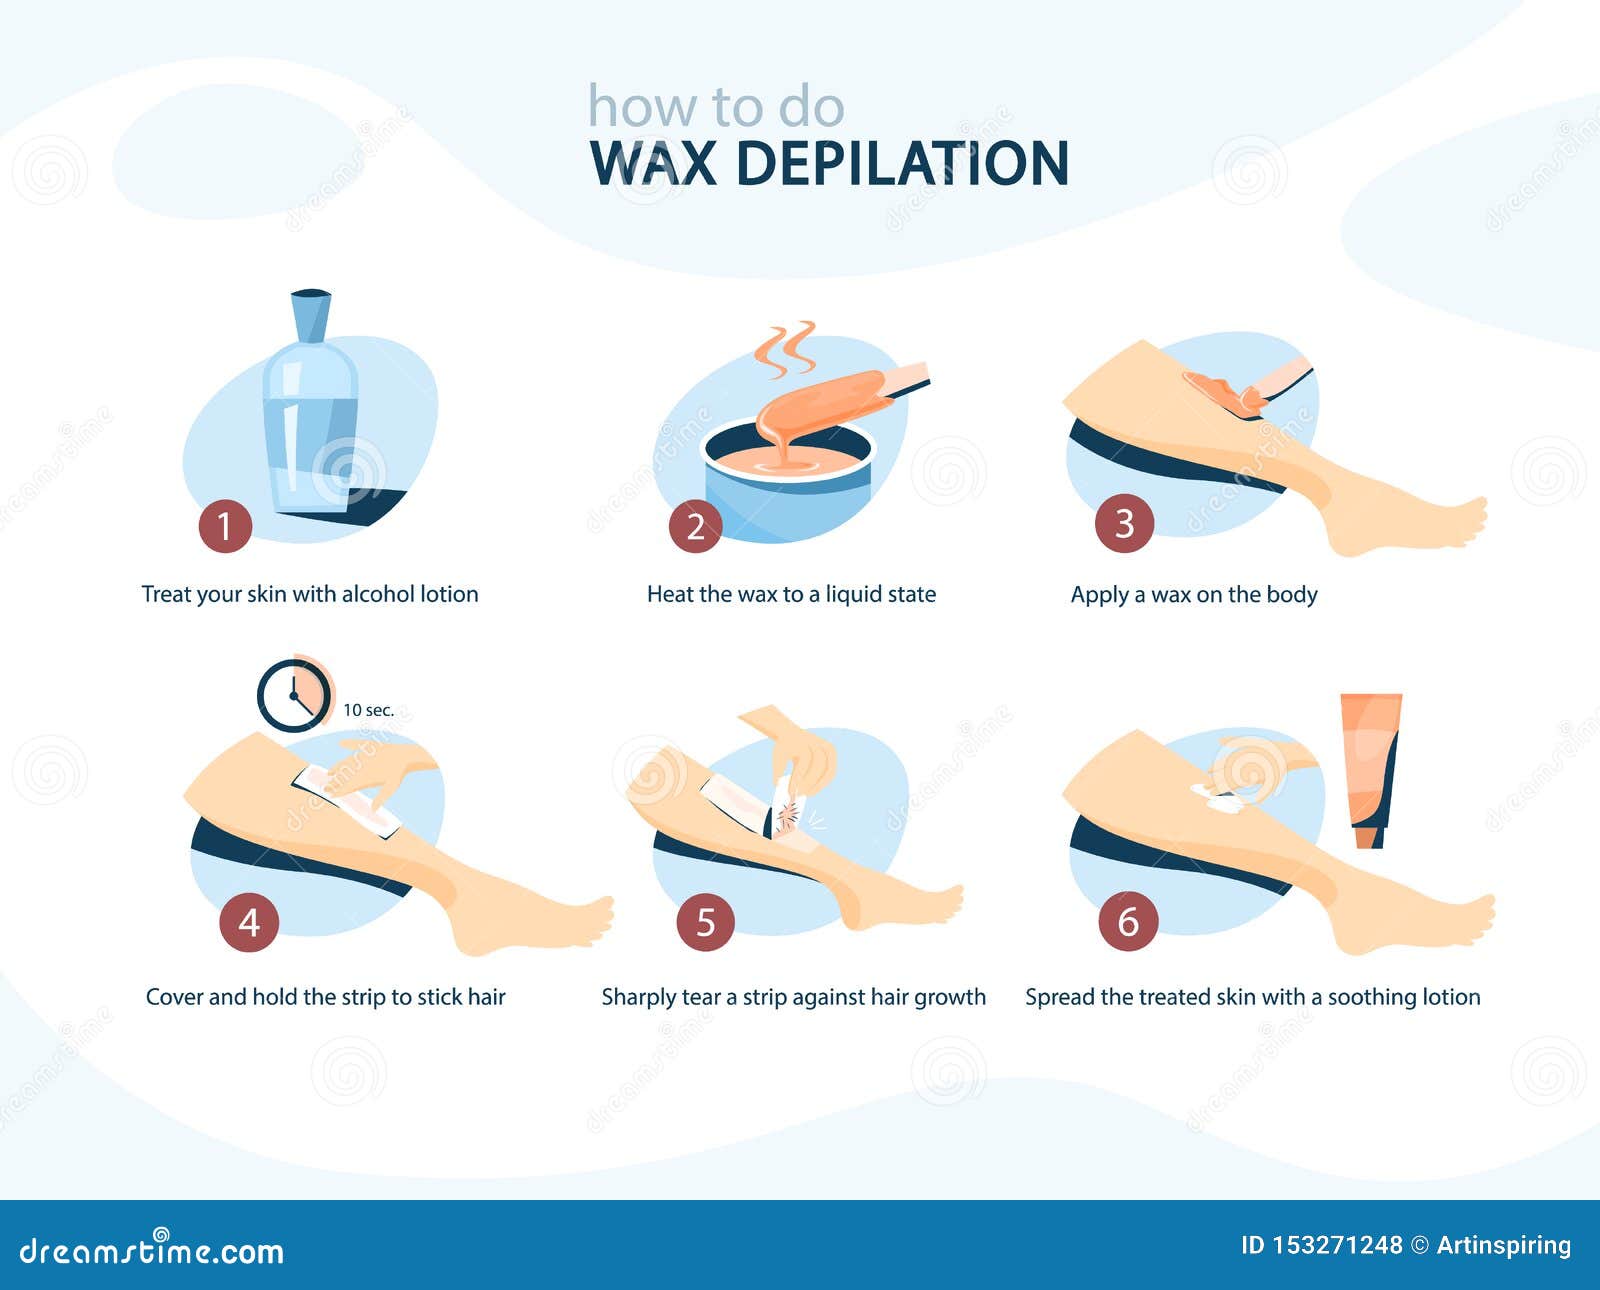 6. Blue Wax Hair Removal Step by Step - wide 3